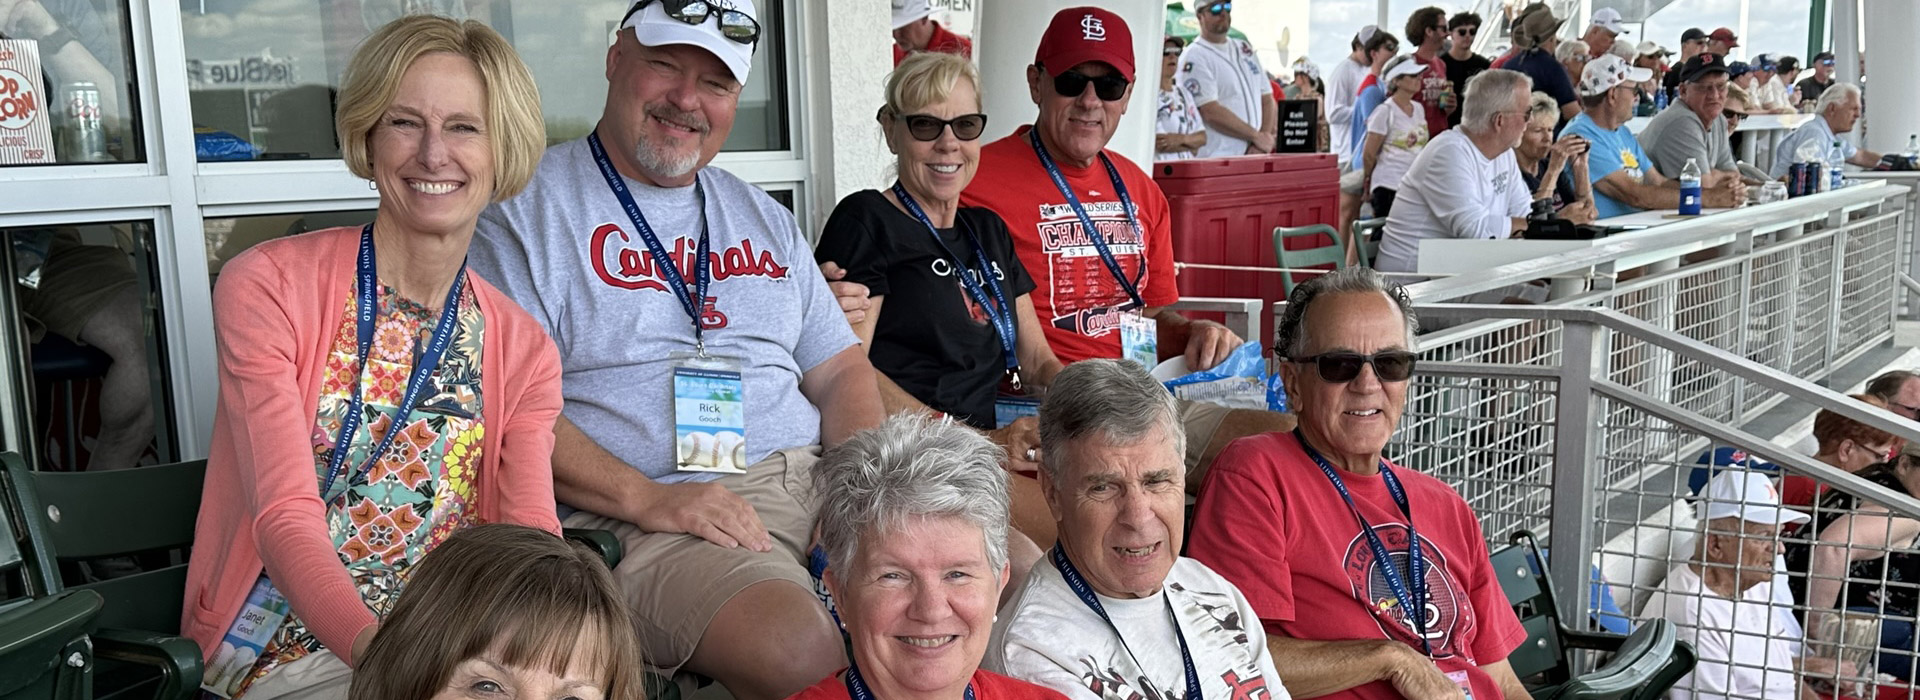 the chancellor and alumni at a St. Louis Cardinals game